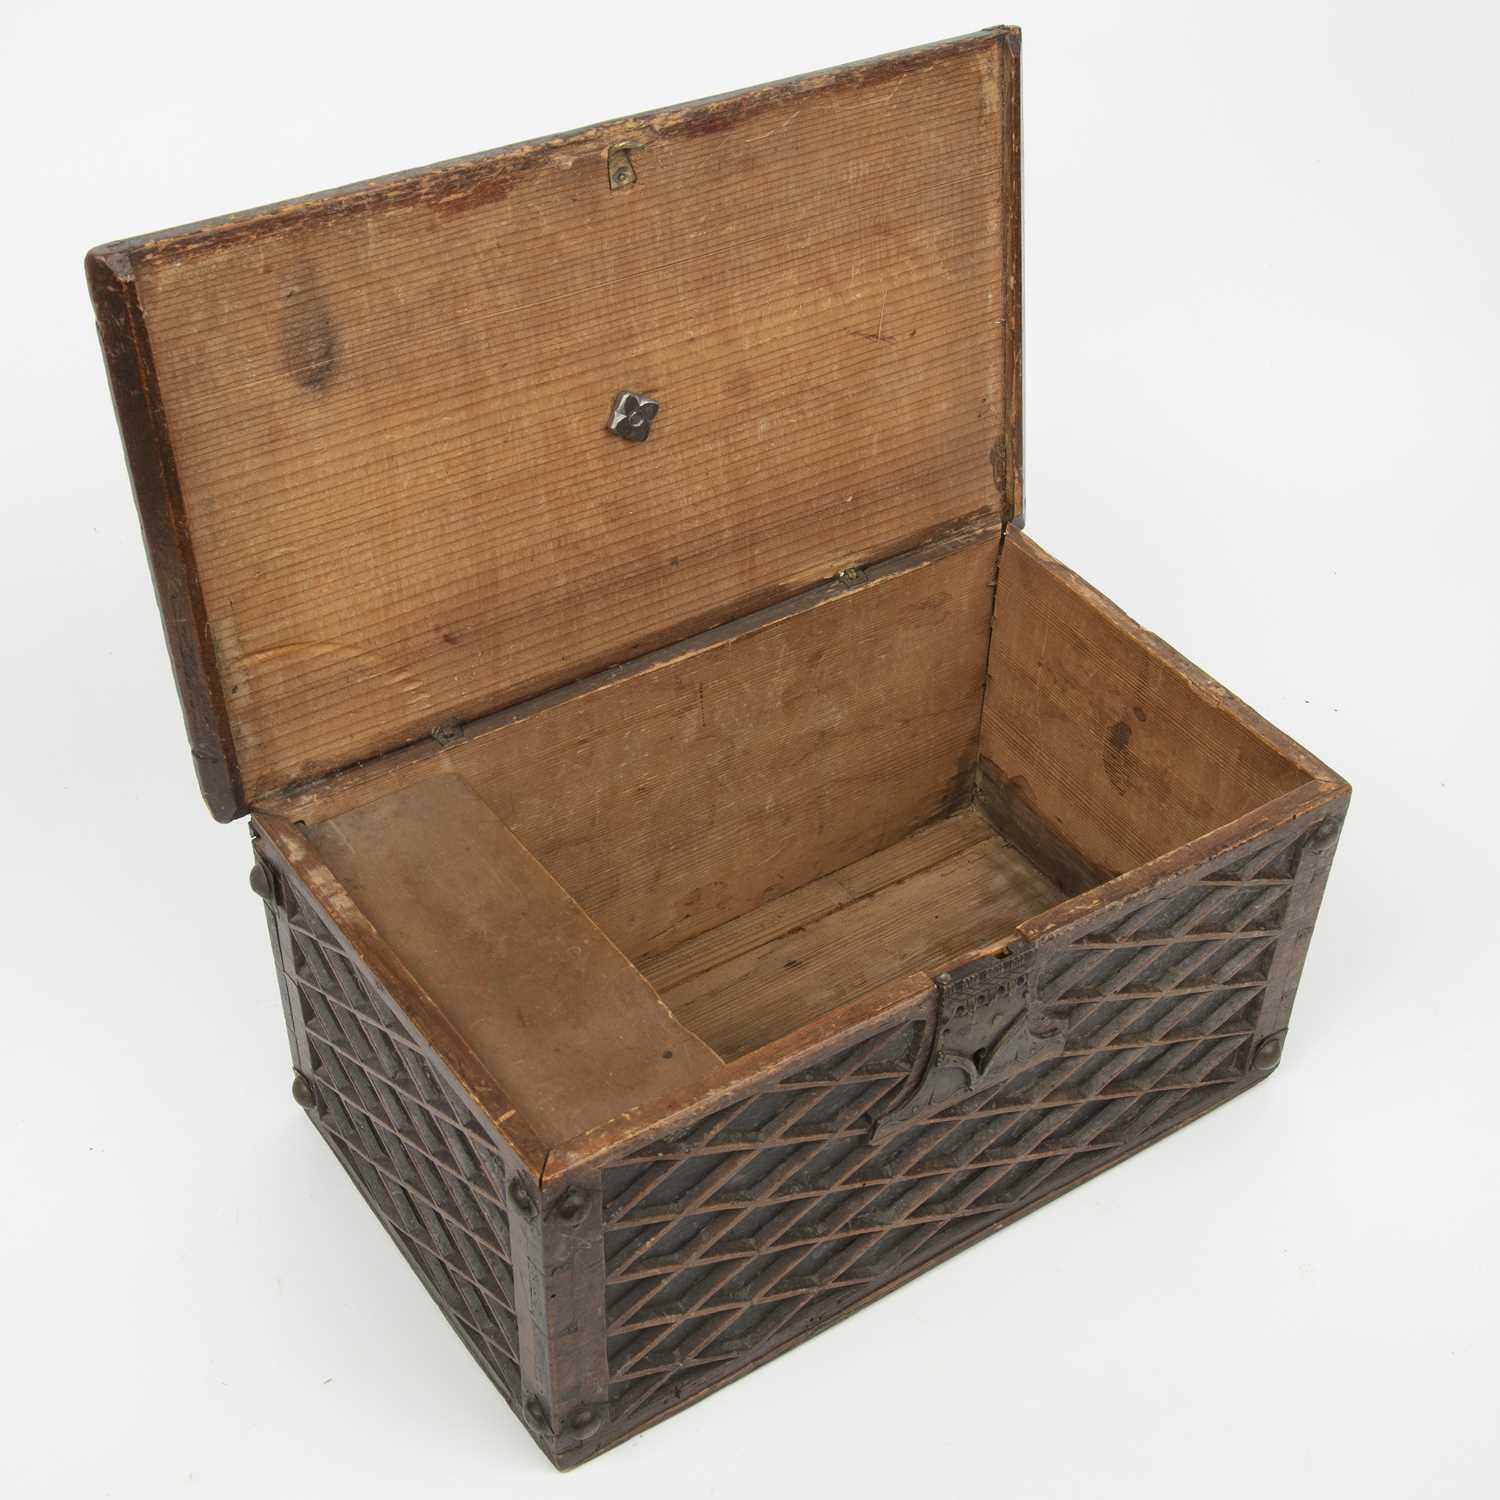 A late 18th / early 19th century German pine tinder box with brass mounts and lattice decoration, - Image 4 of 6